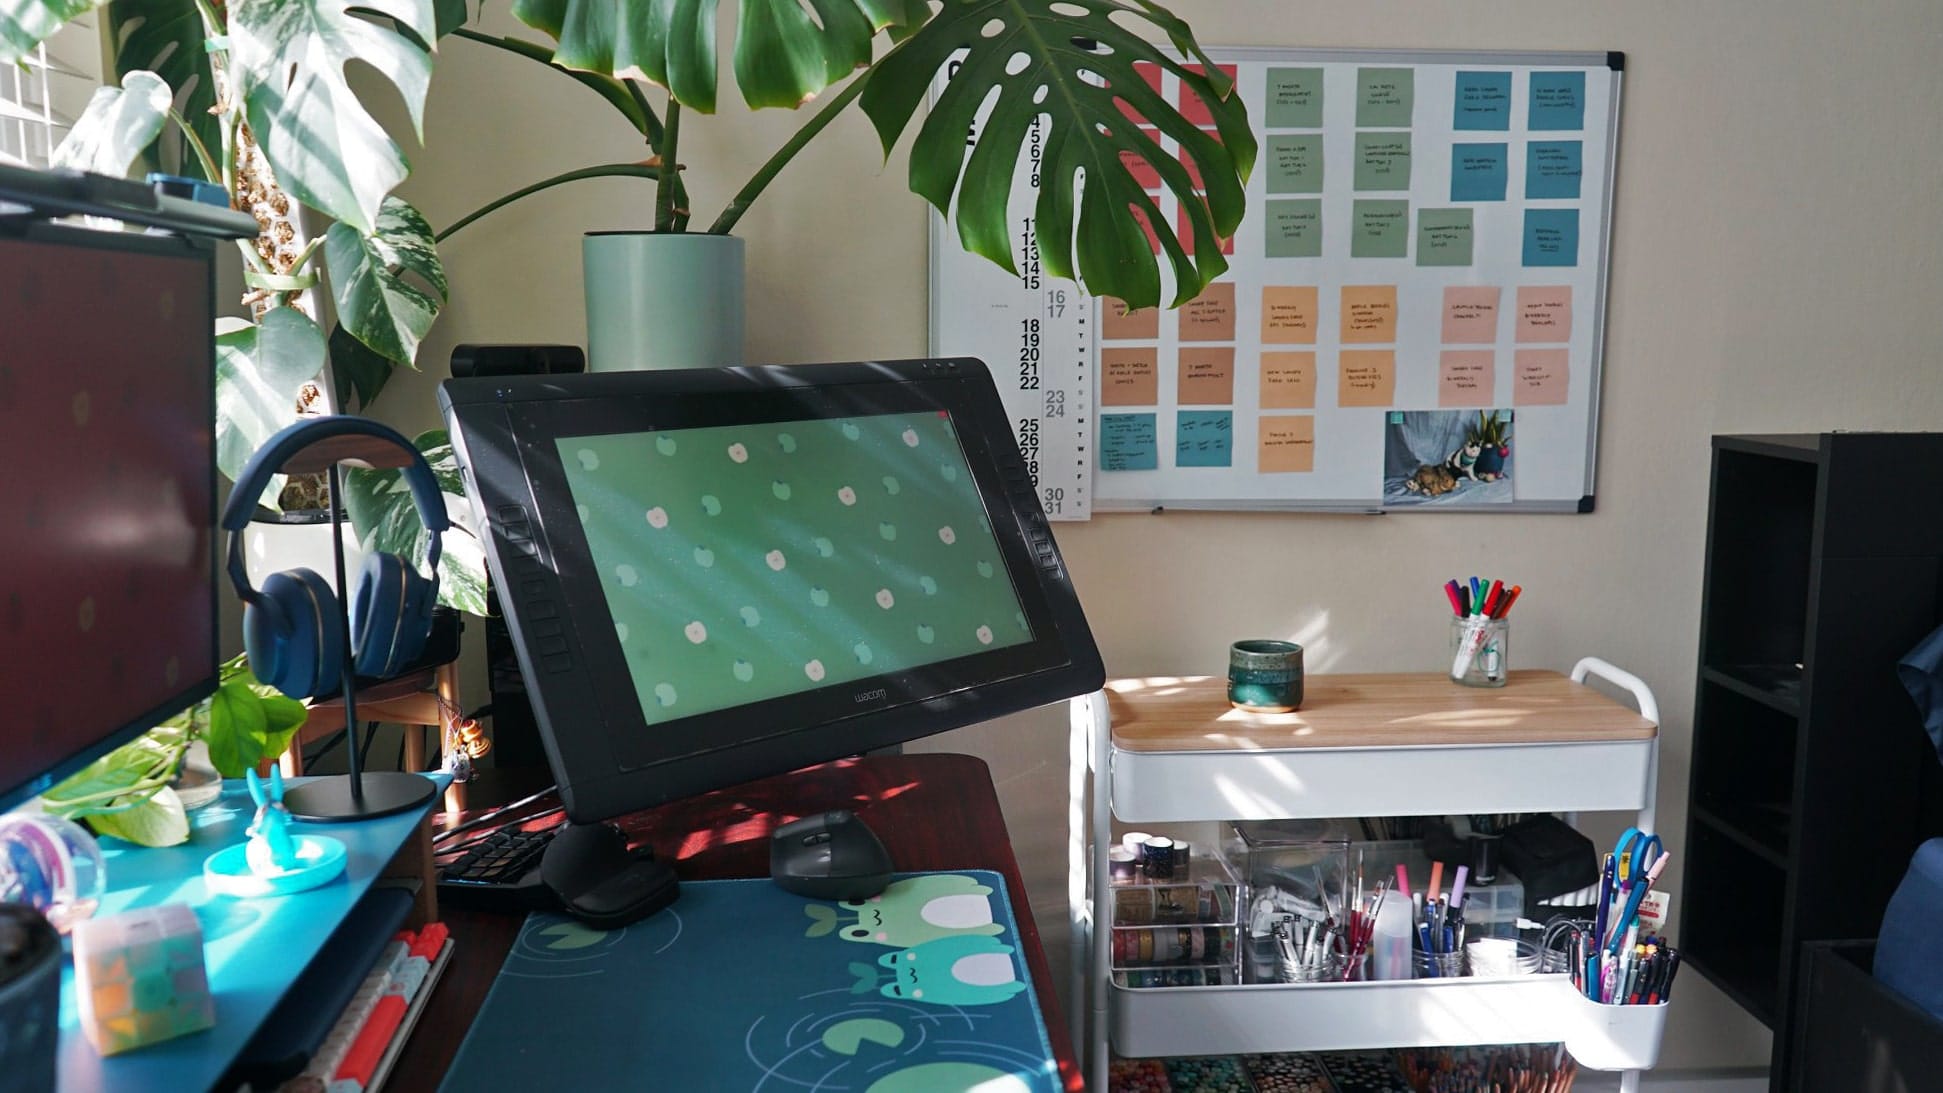 A sunlit workspace with a drawing tablet, headphones, indoor plants, and an organised wall planner next to a desk with art supplies